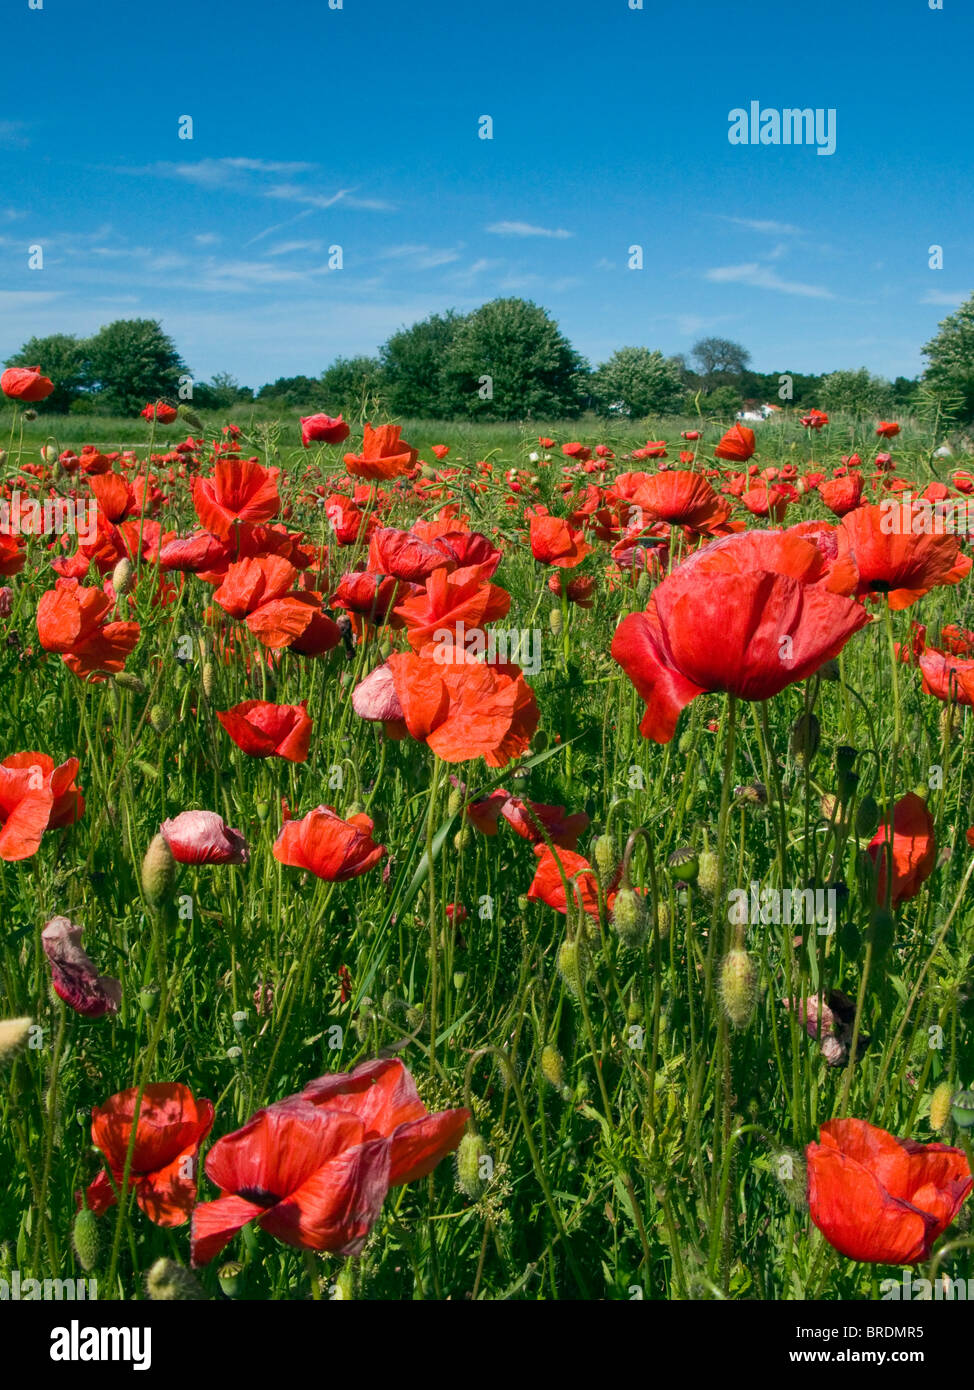 A field of red Poppies against a blue summer sky Stock Photo